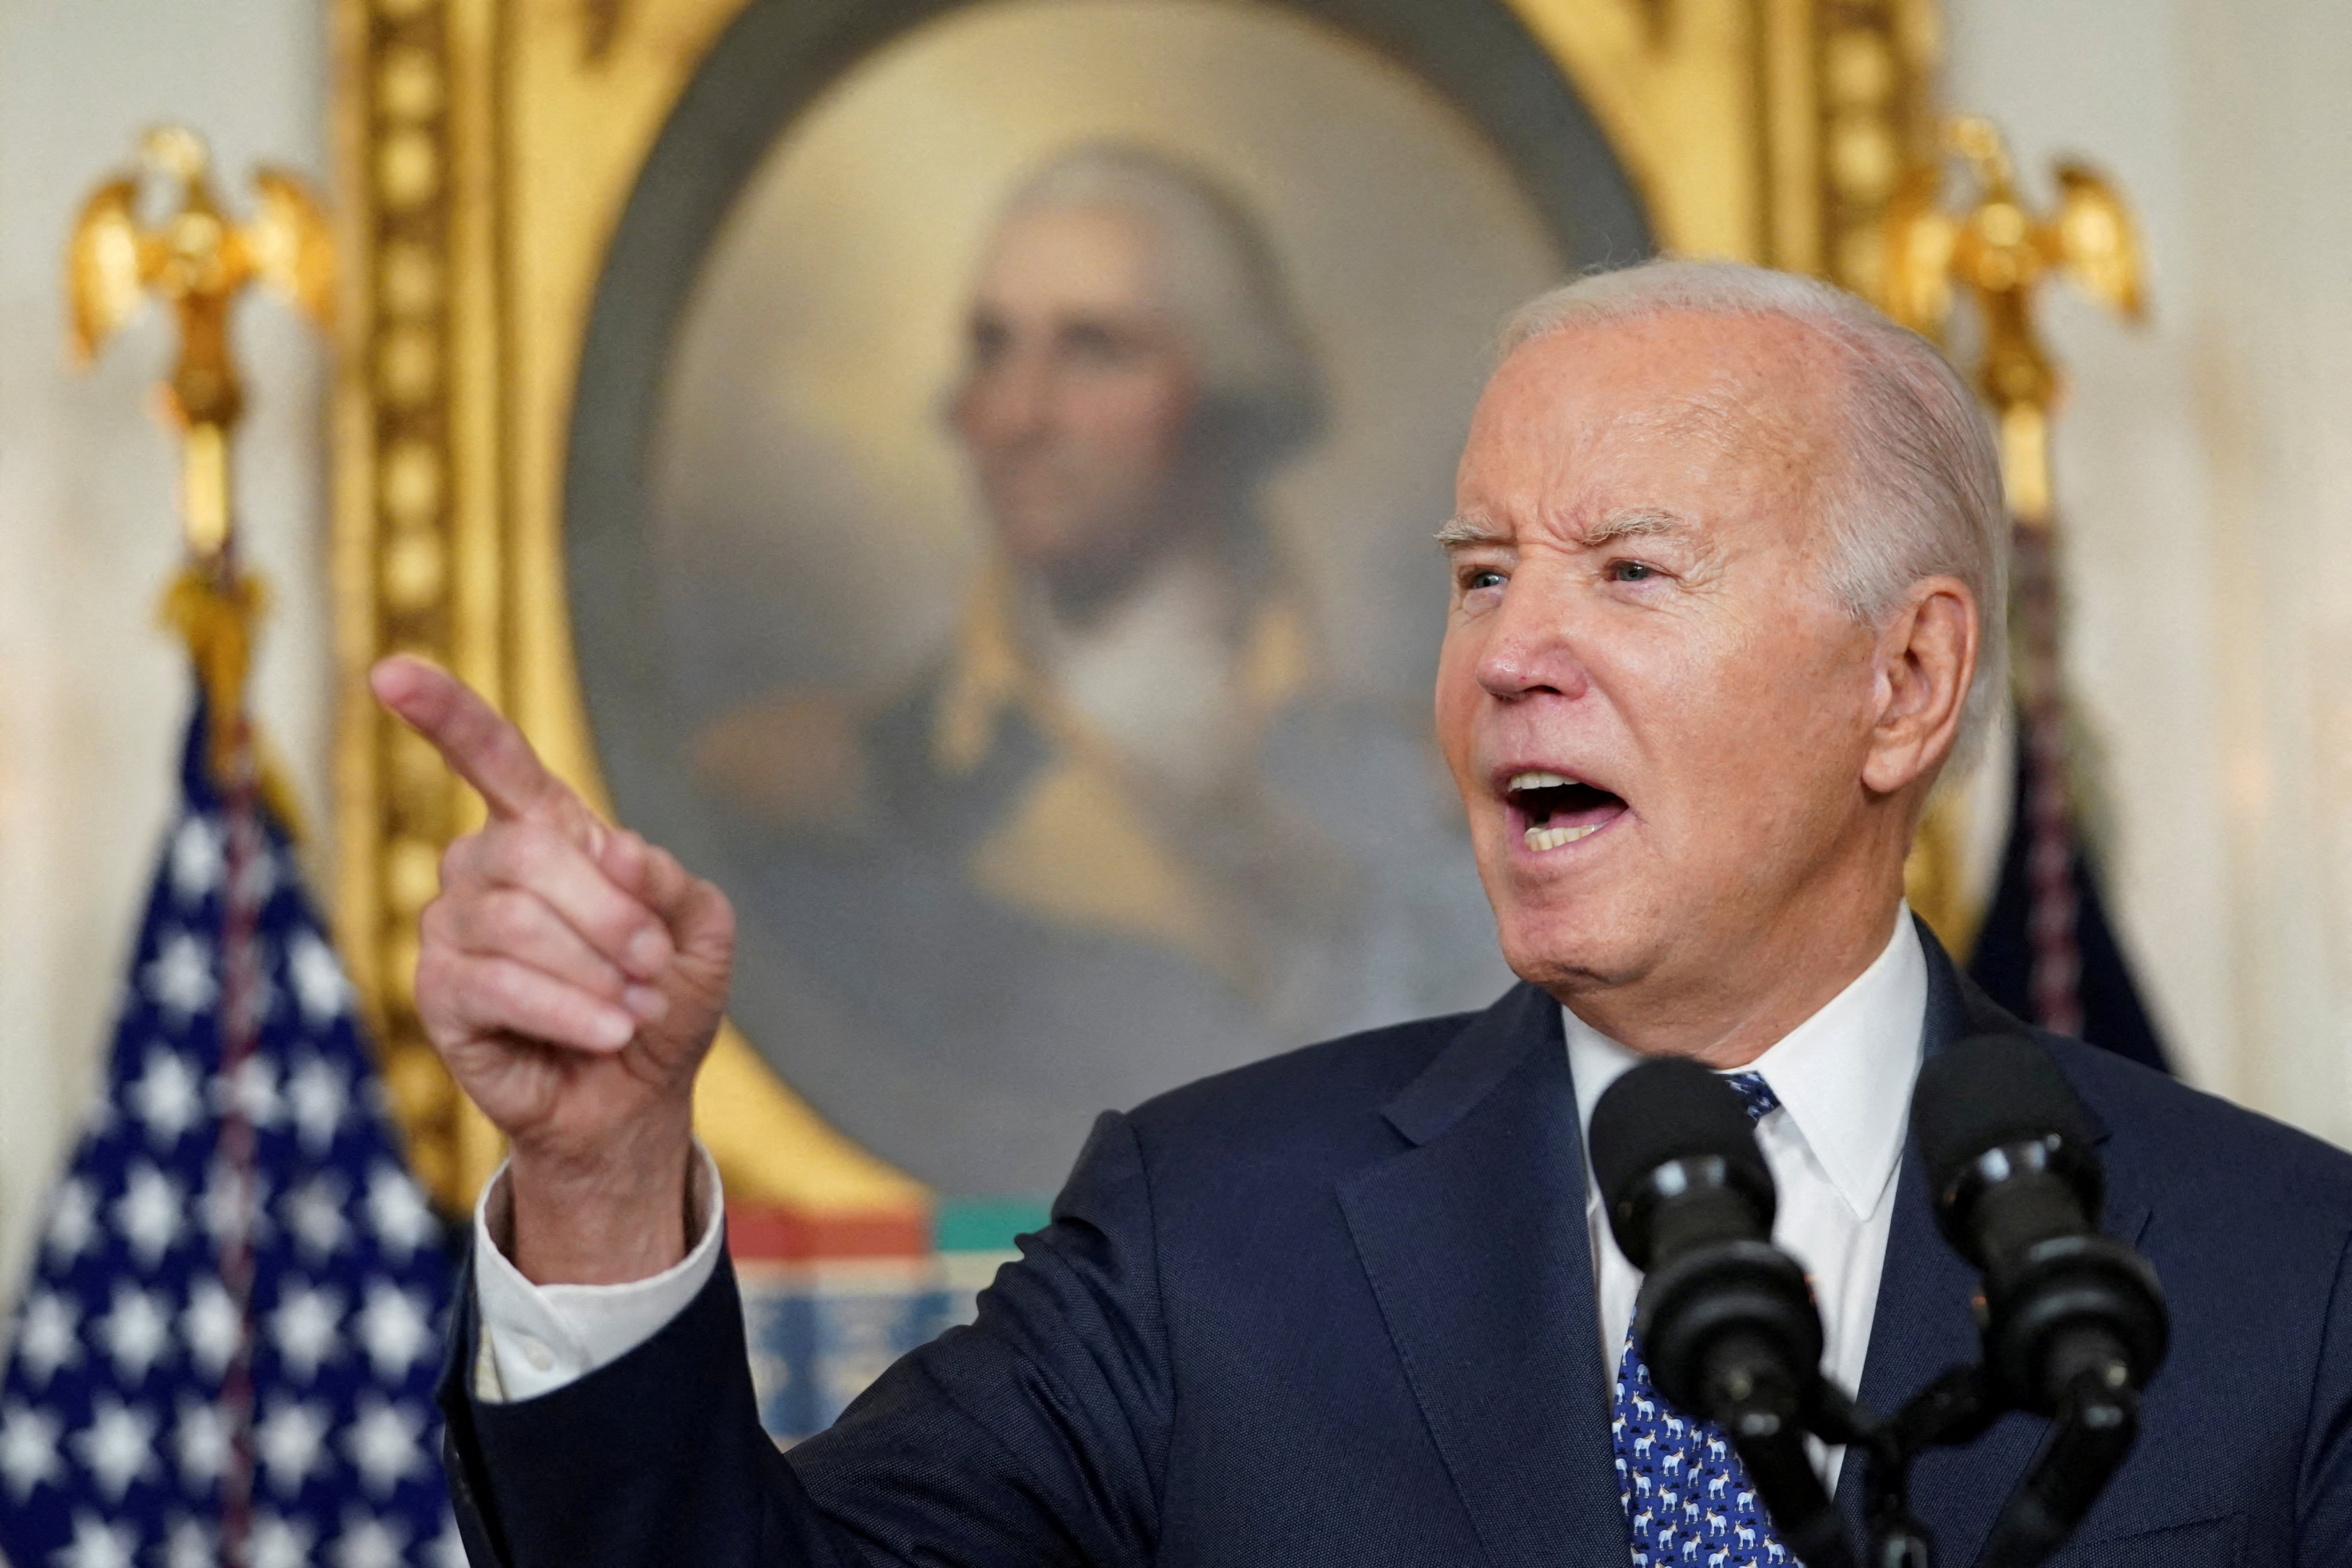 US President Joe Biden gestures as he delivers remarks at the White House on February 8. Photo: Reuters